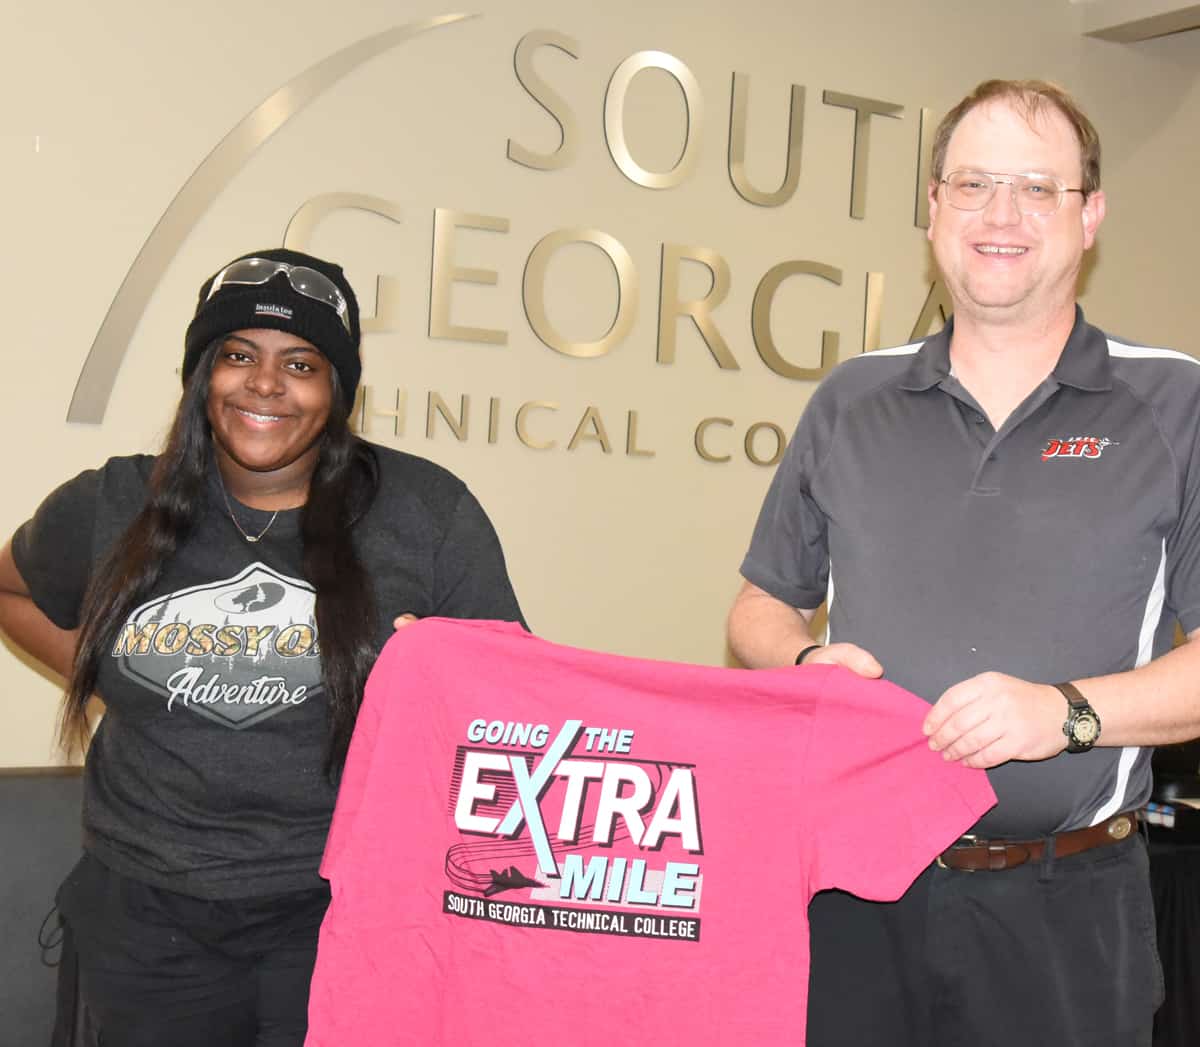 Jason Wisham is shown above with SGTC Aircraft Structural Technology graduate Makalya McCants who is still going the extra mile even after graduating from South Georgia Tech.